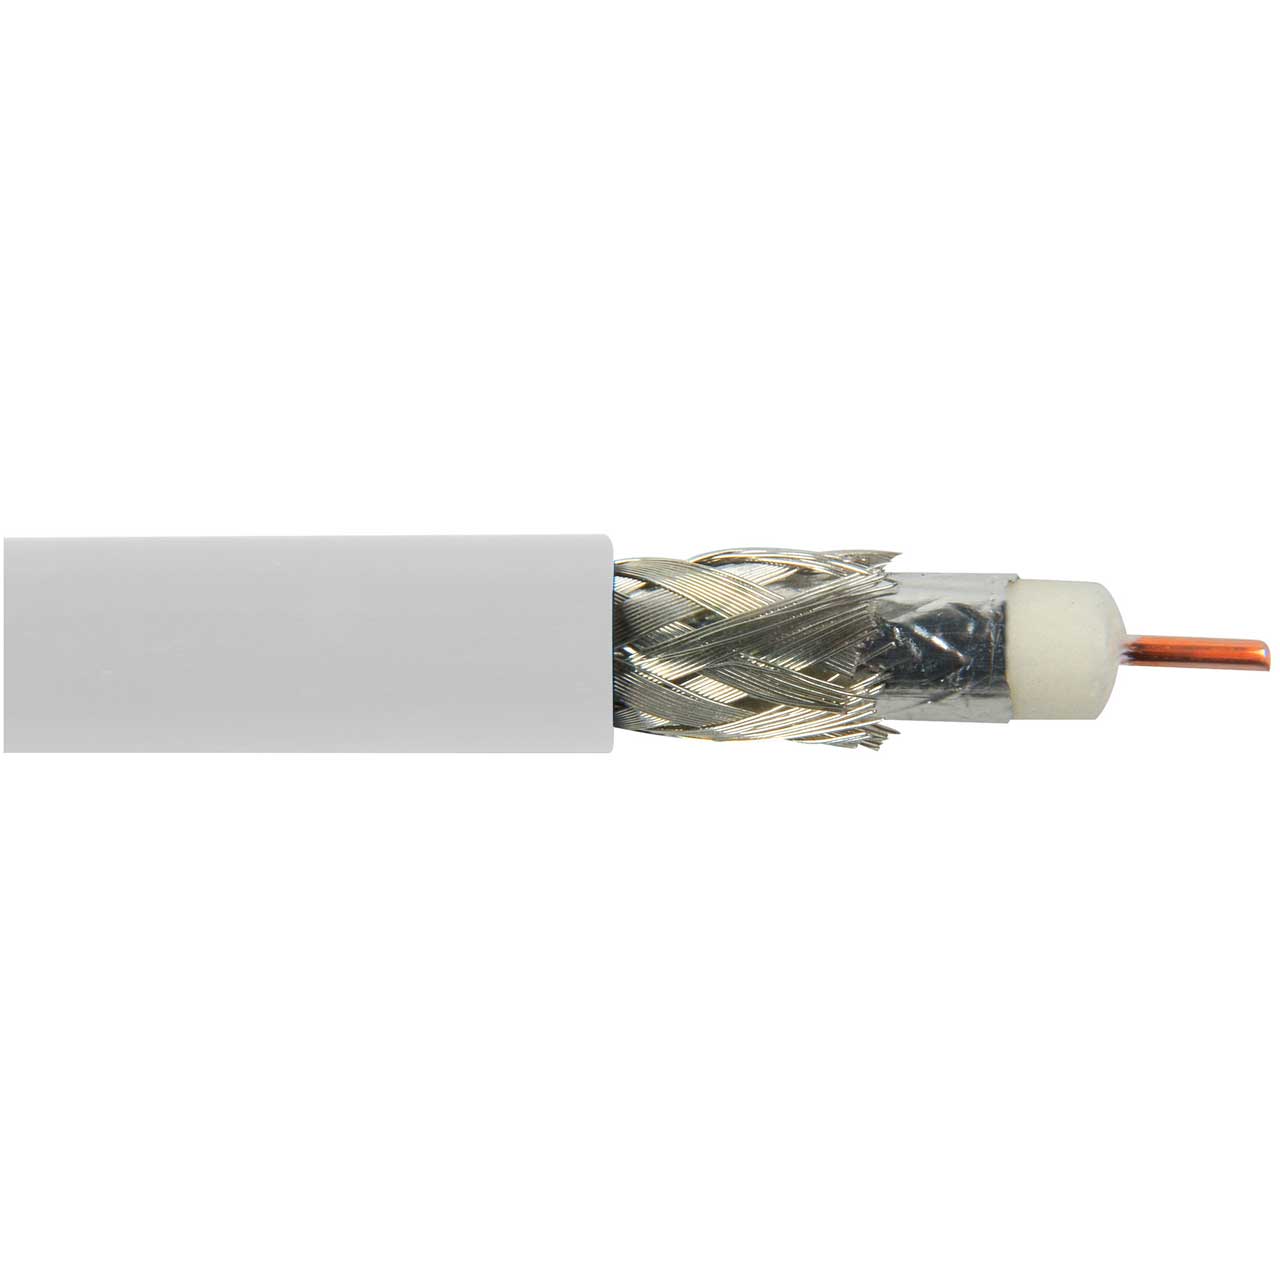 Belden 1694A 0091000 75 Ohm 3G-SDI Digital Coaxial Cable - RG-6 - 18 AWG - CMR Rated - White - 1000 Foot